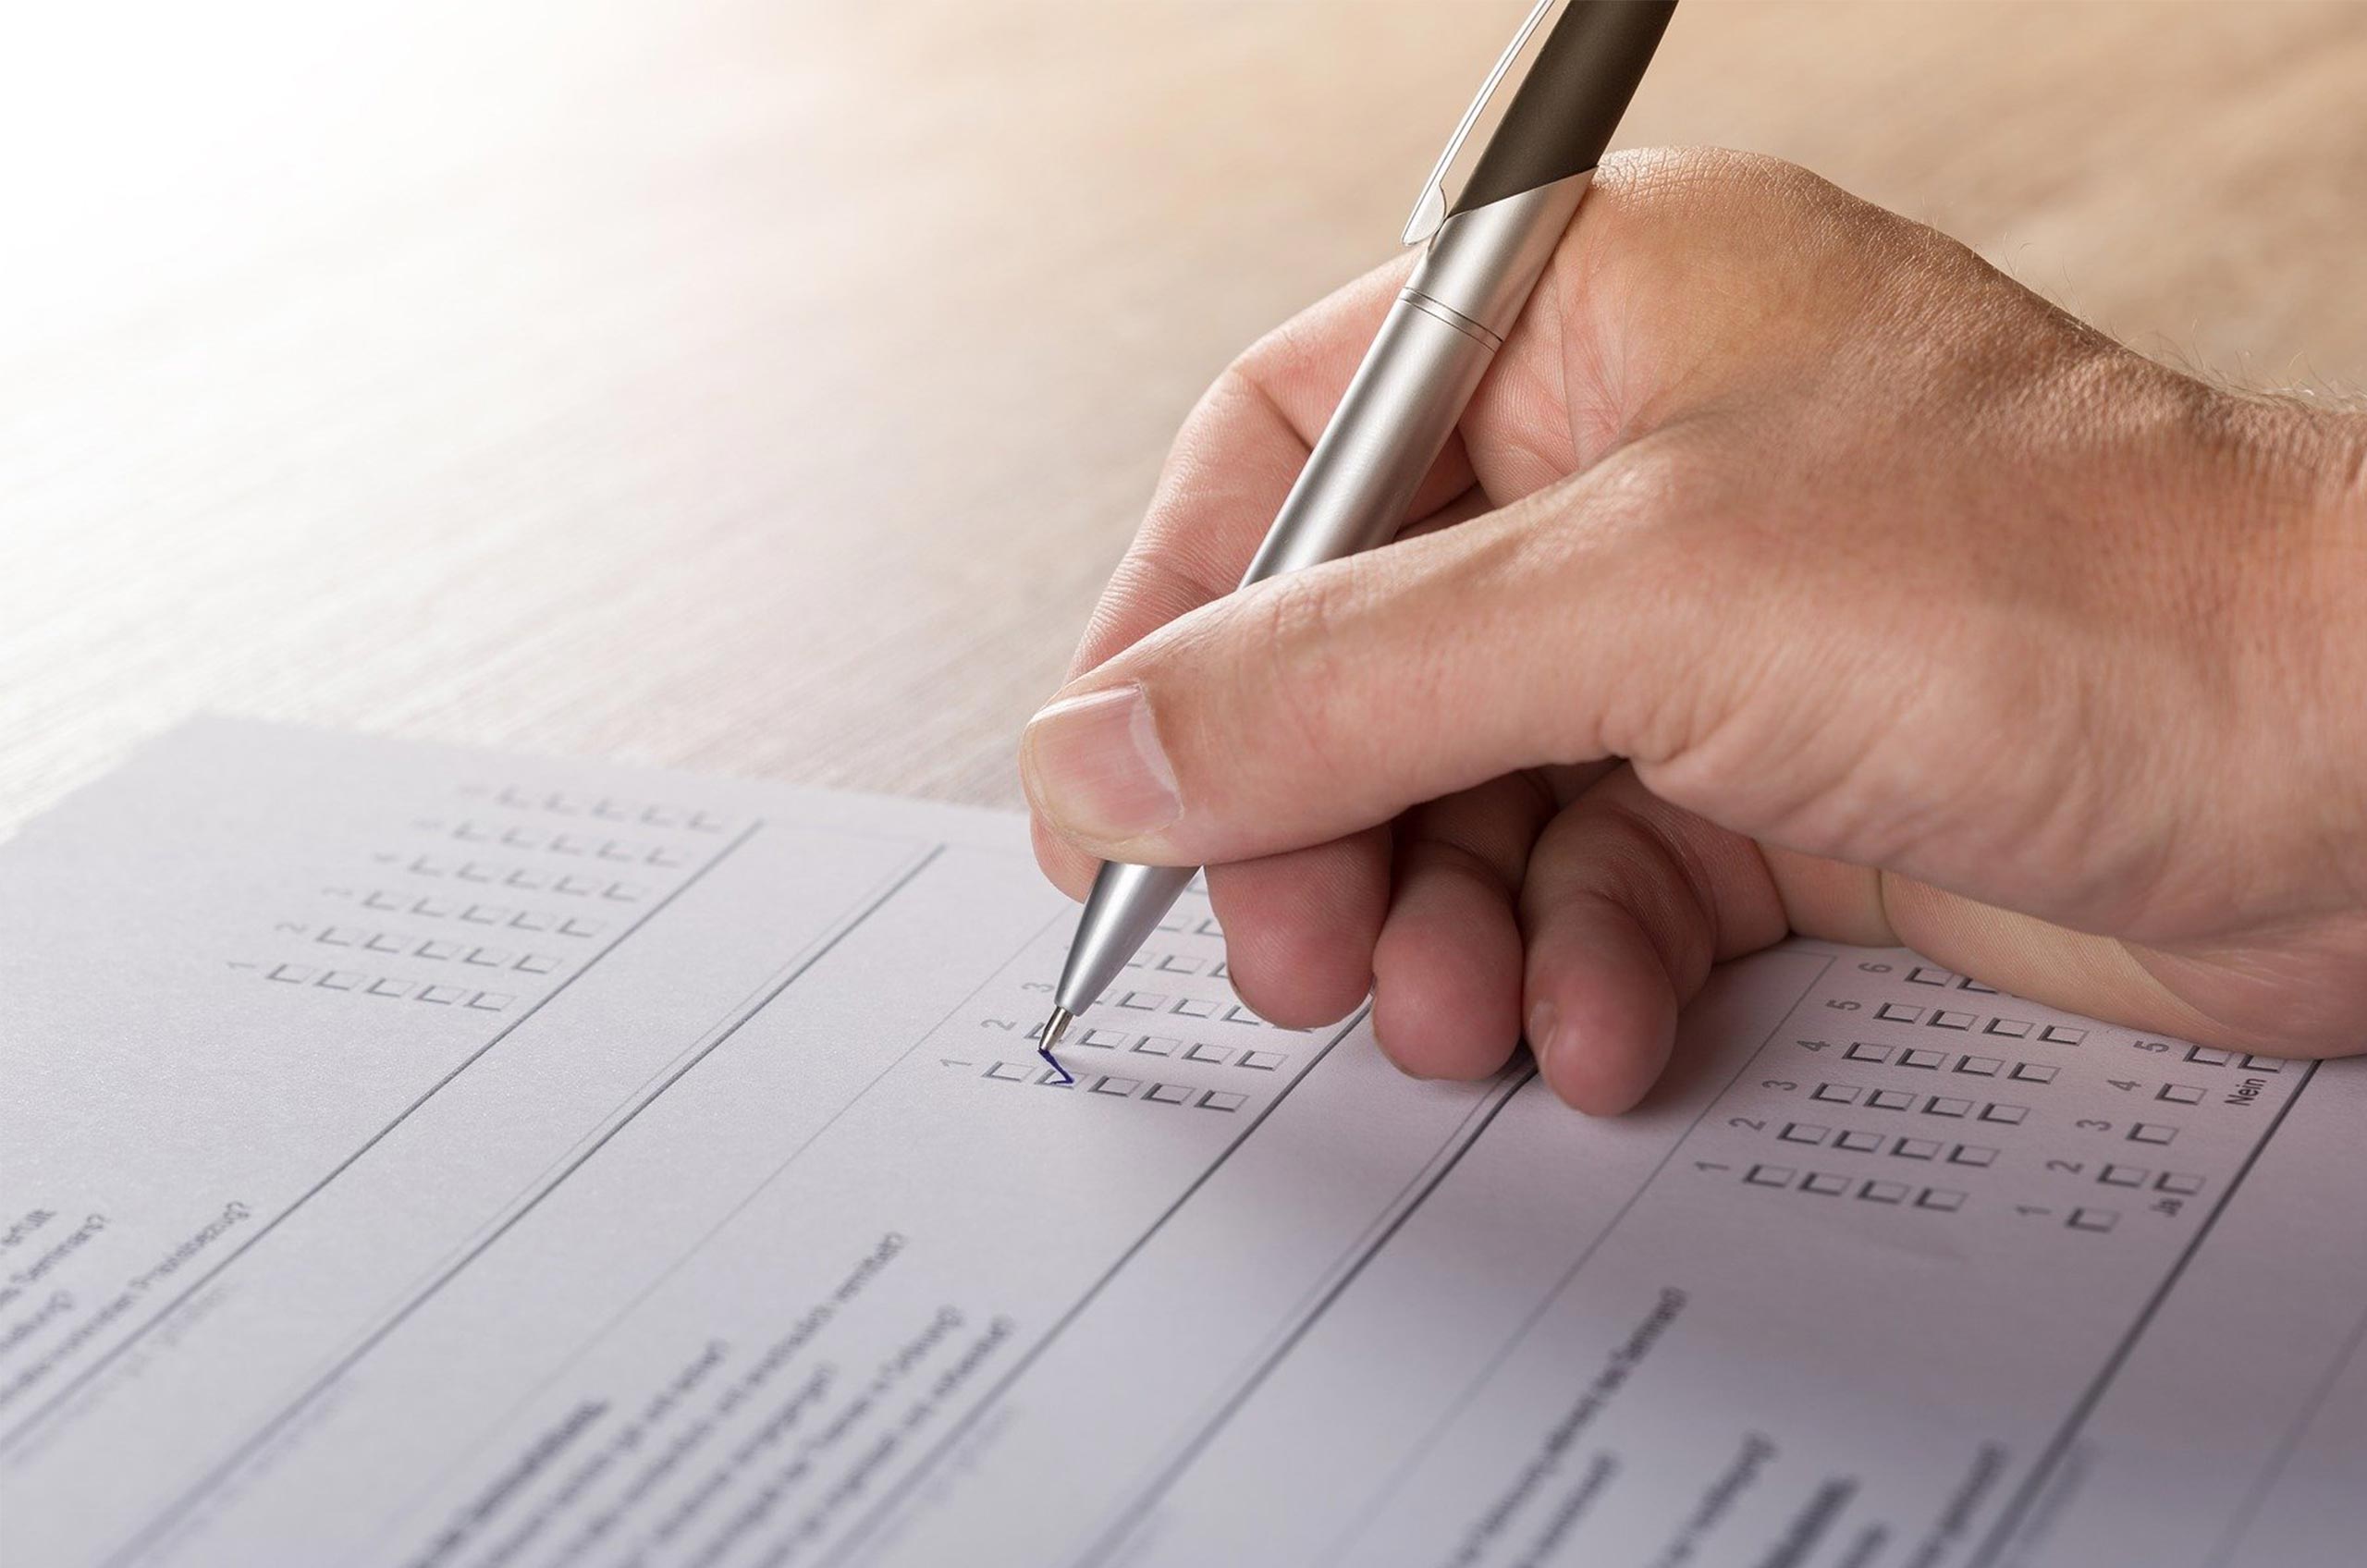 hand writing with a pen onto a survey form